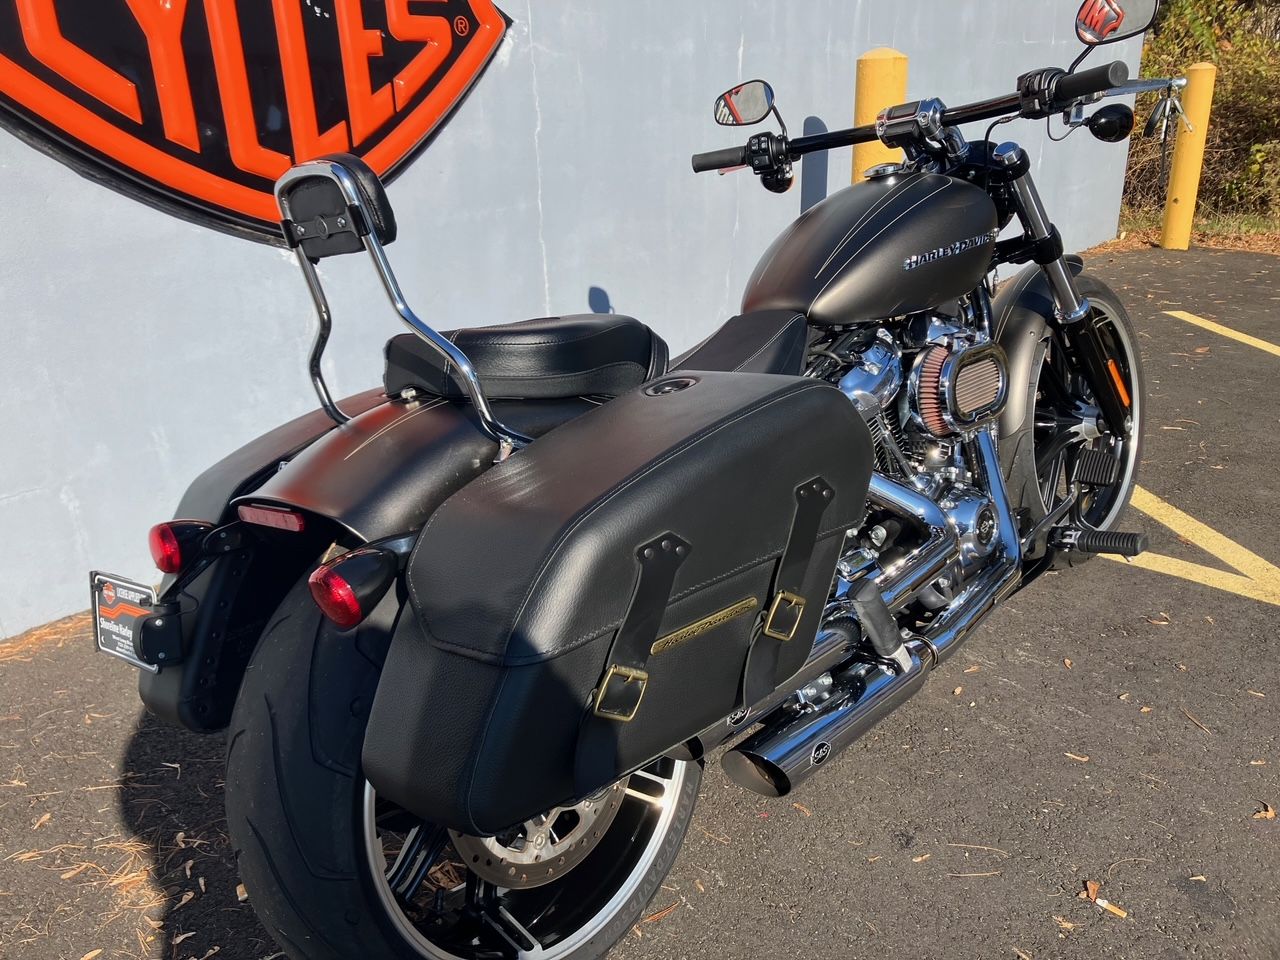 2020 Harley-Davidson BREAKOUT in West Long Branch, New Jersey - Photo 3